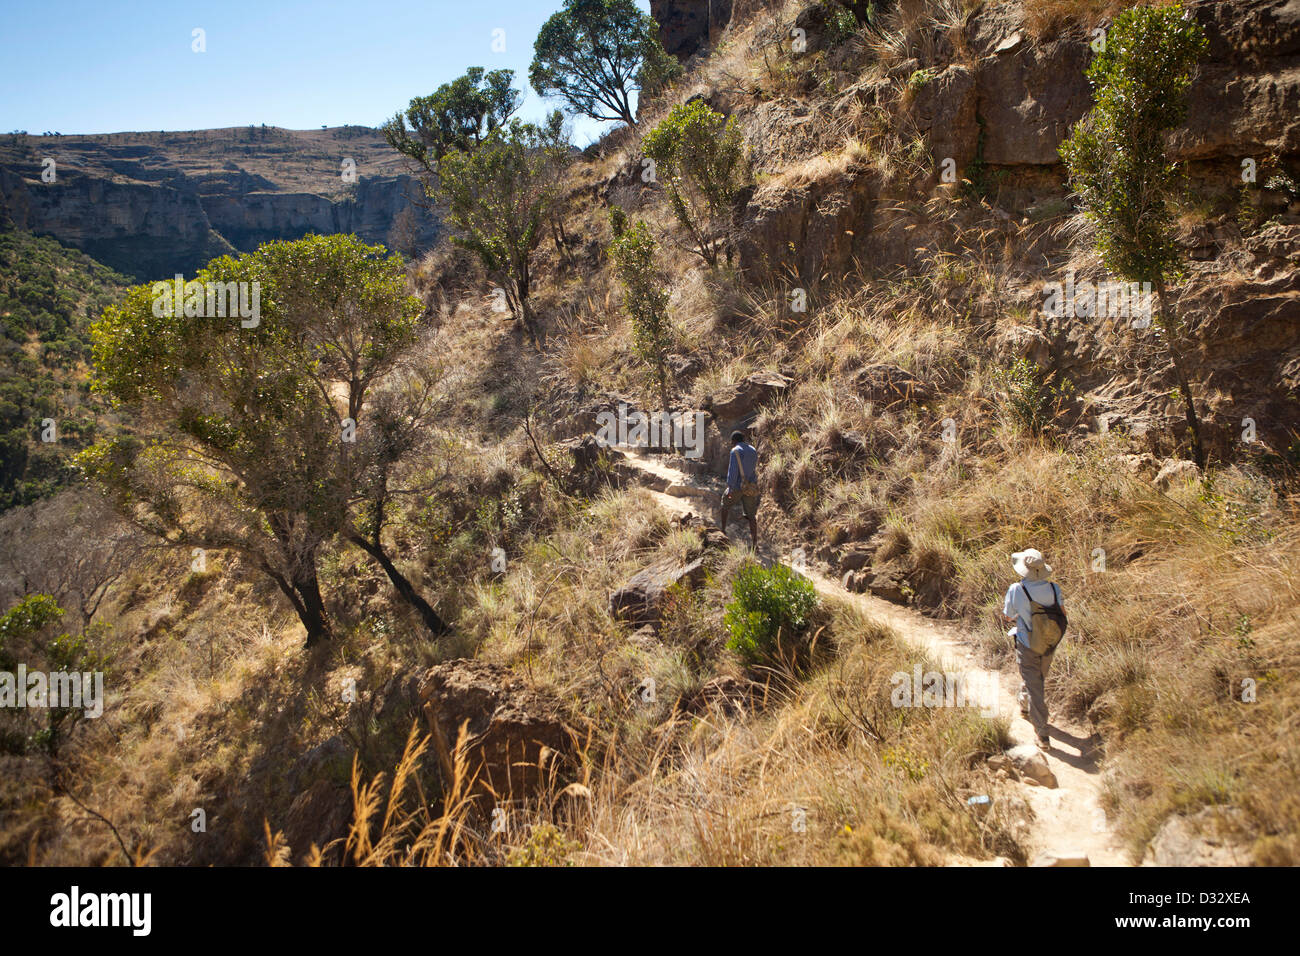 Madagascar, Parc National de l’Isalo, Namaza, tourist and guide walking down rocky trail Stock Photo